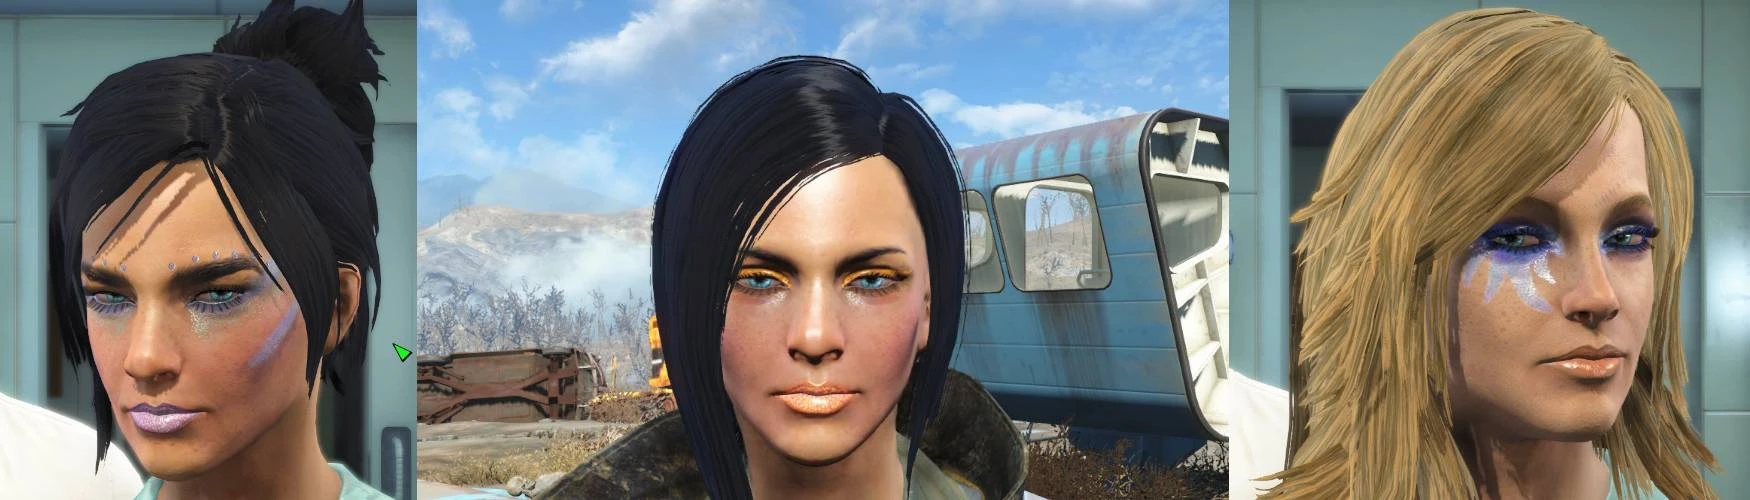 Rave And Glitter Makeup At Fallout 4